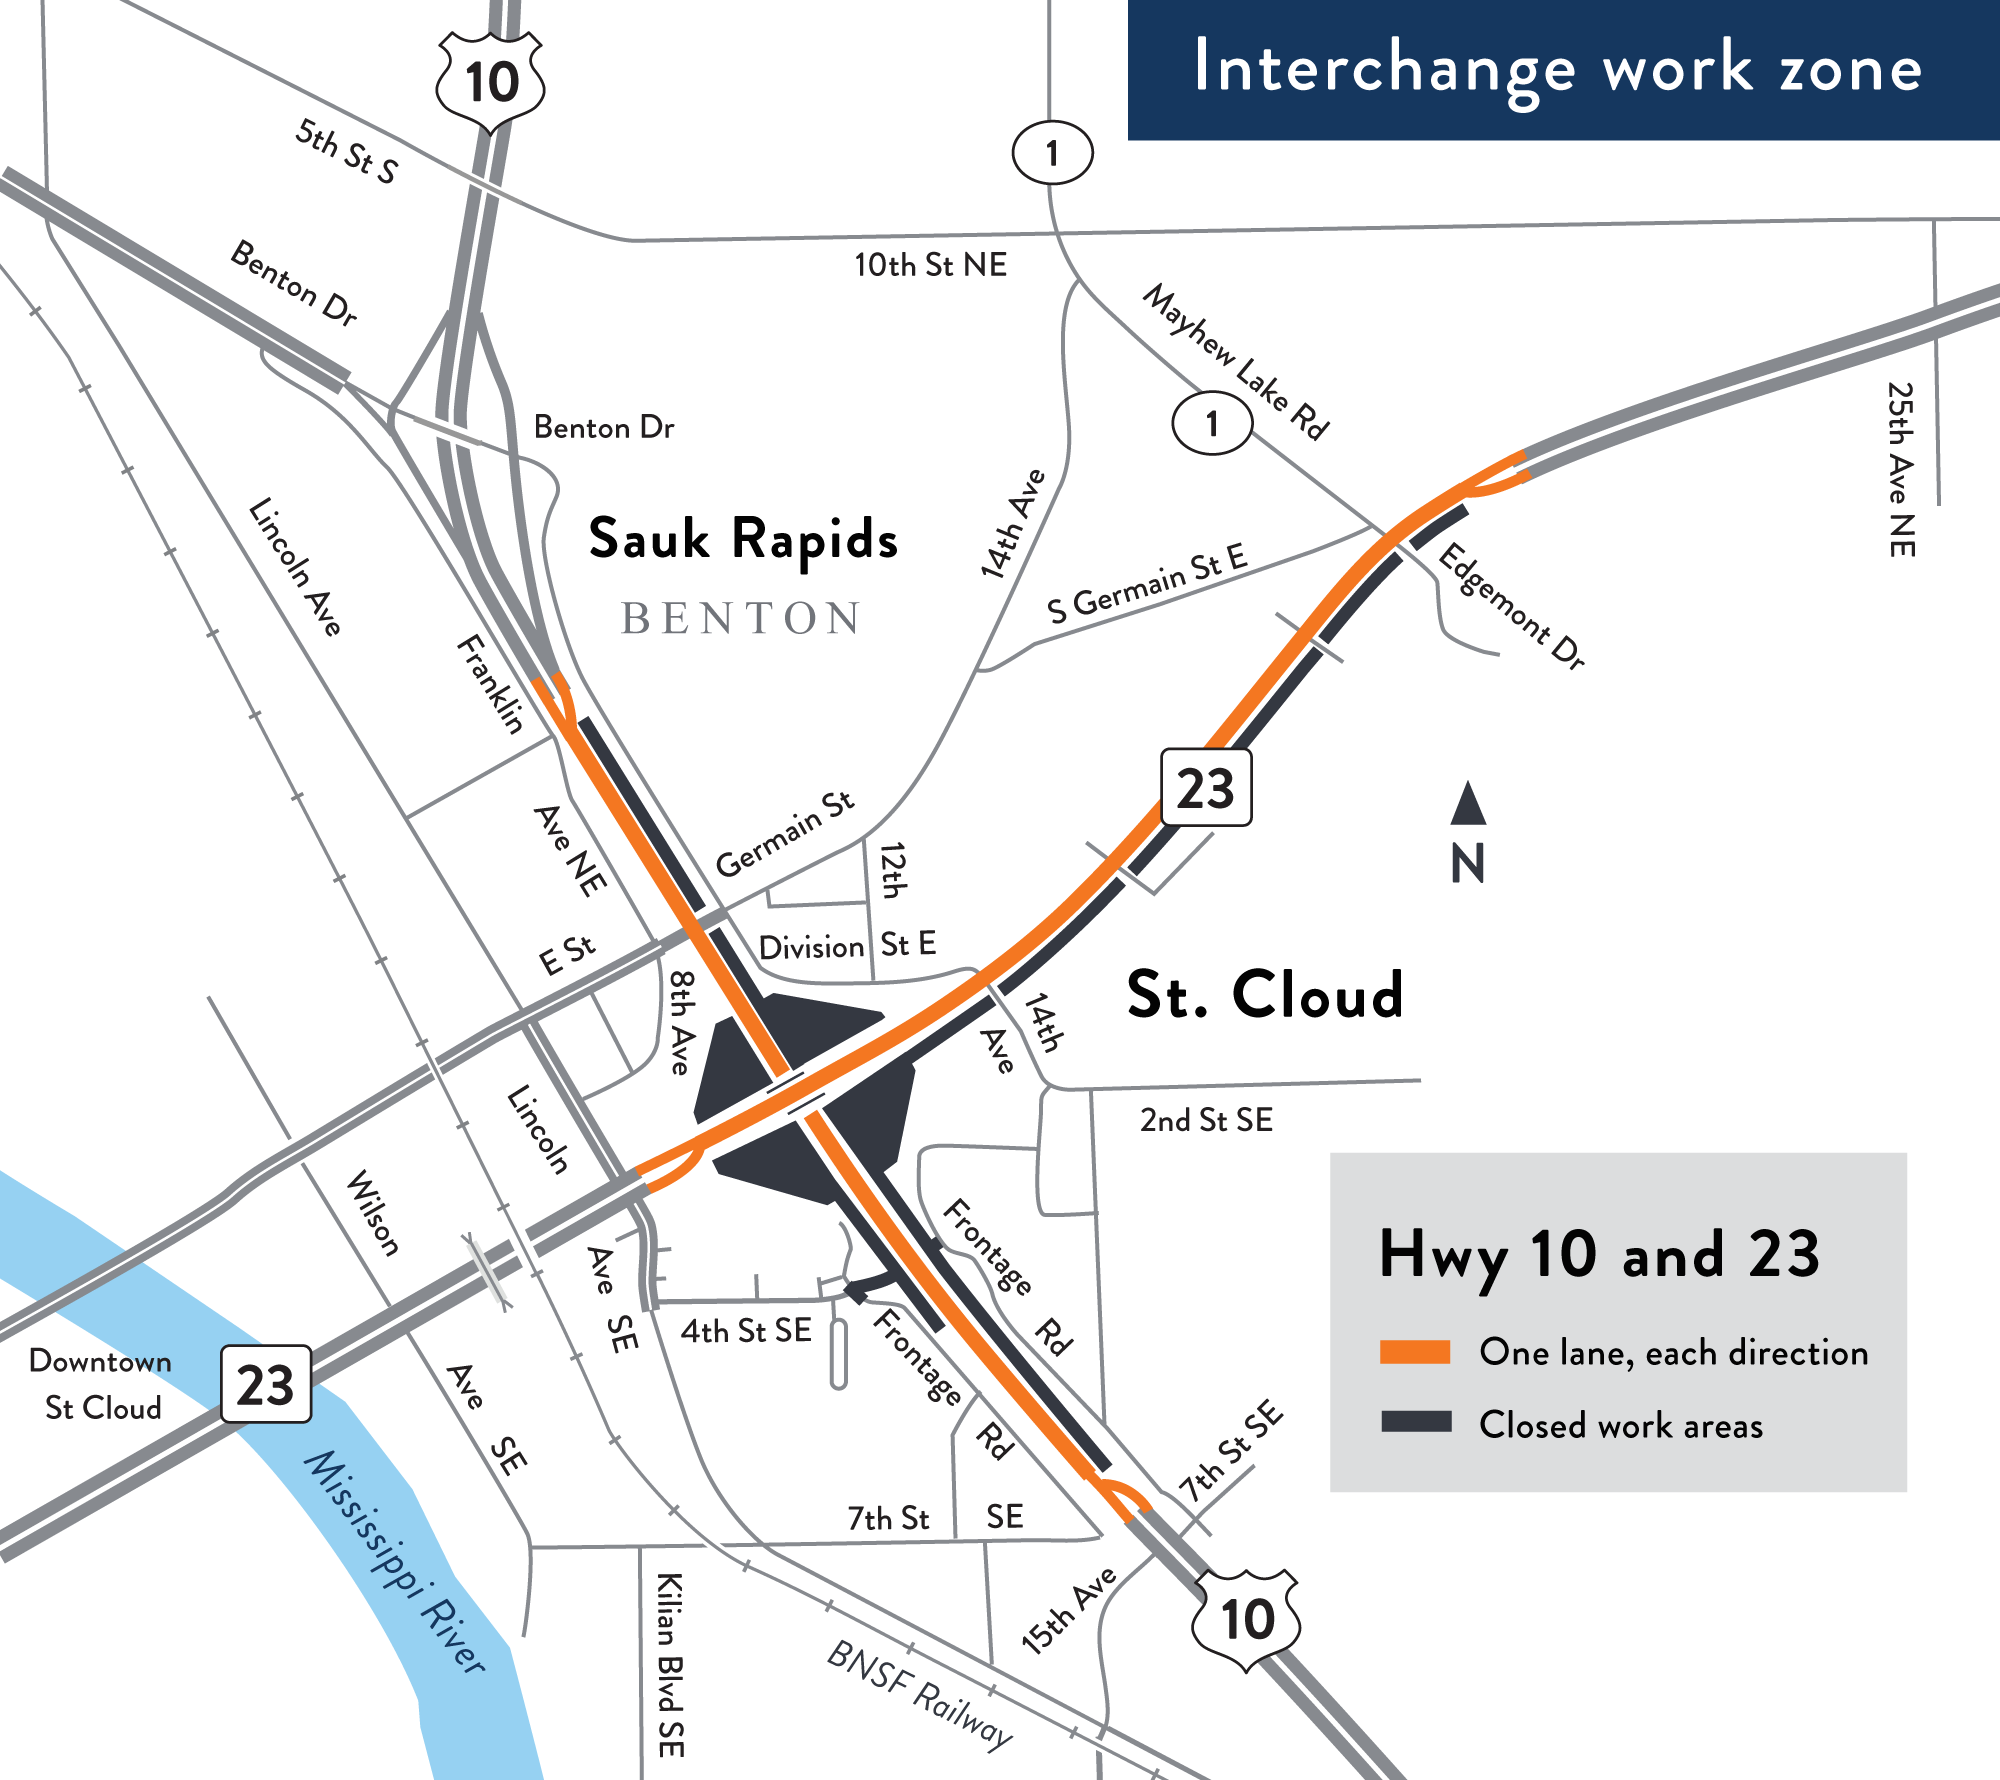 Reconstruct Hwy 10 and Hwy 23 in St. Cloud